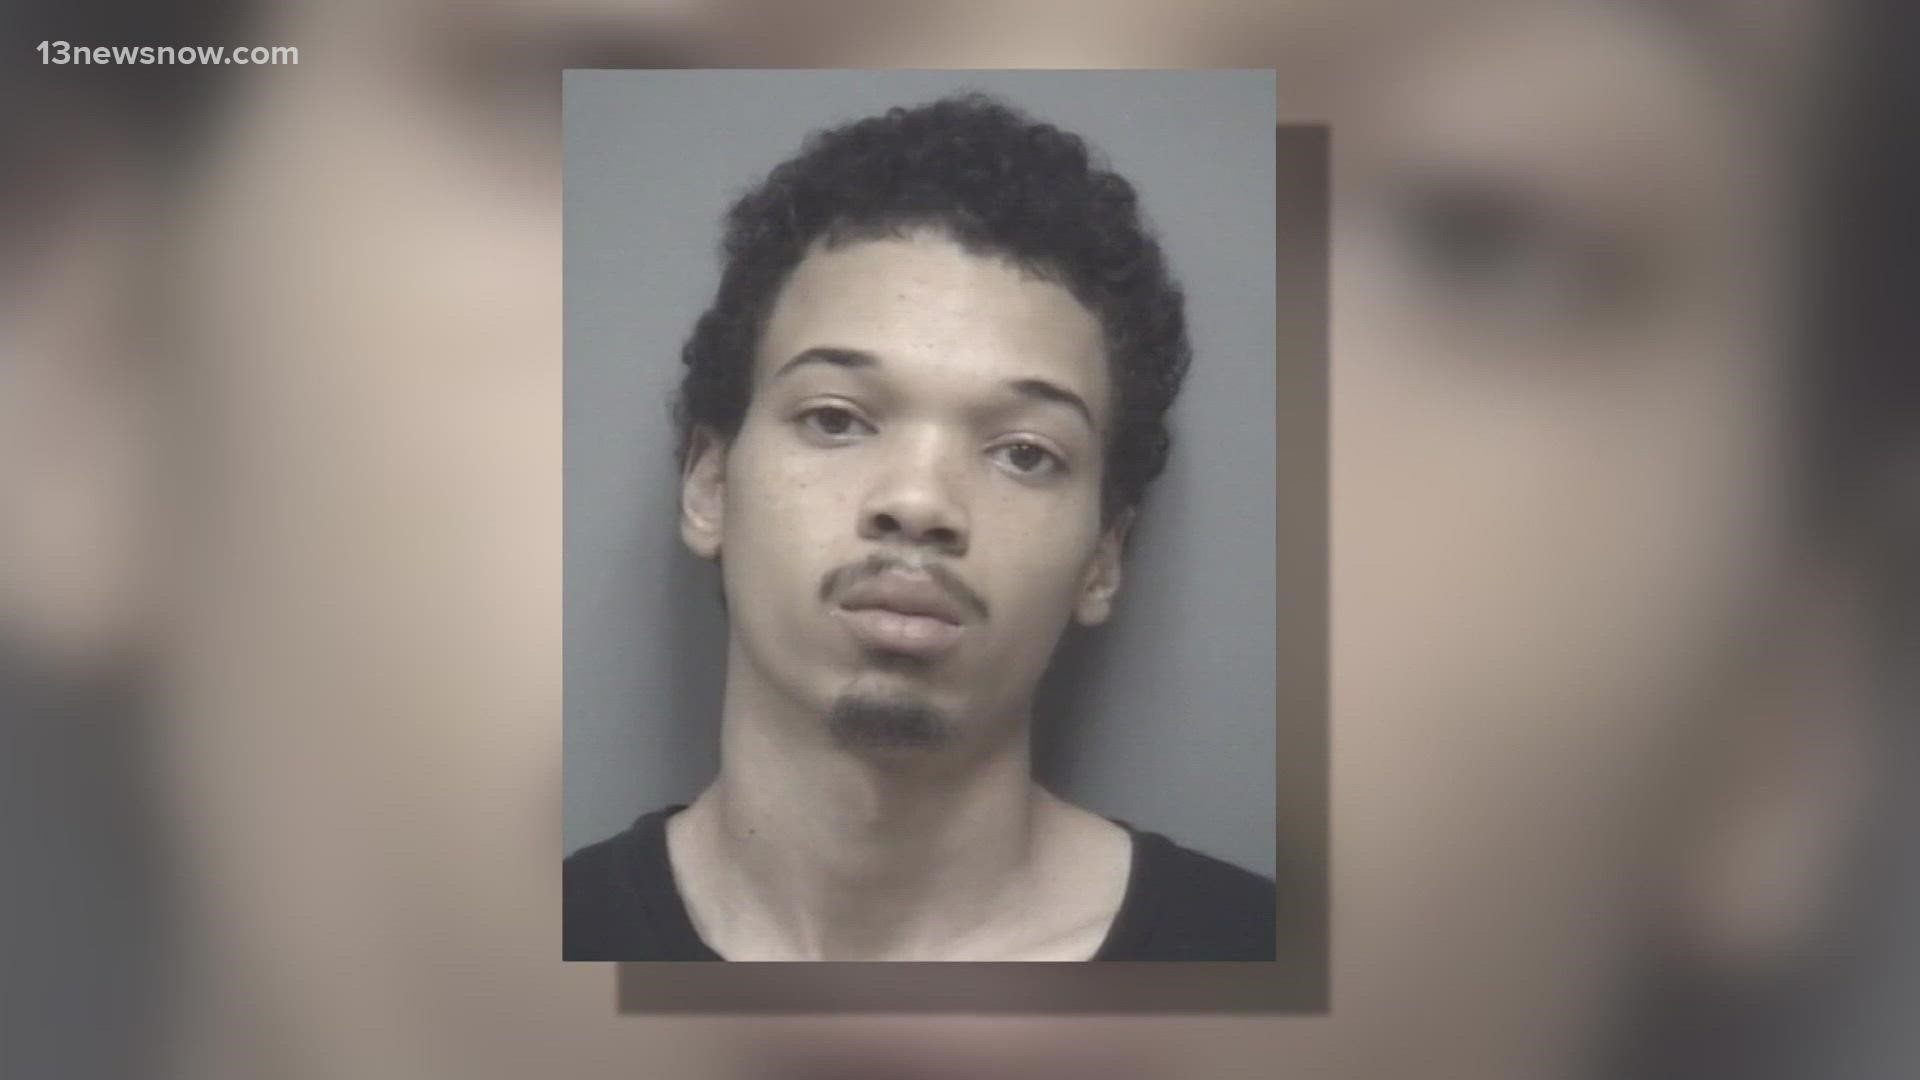 In September 2021, Rakim Breeden was shot and killed at Safco Distribution Center. Deputies are continuing the search for the suspect, Preston Thomas.